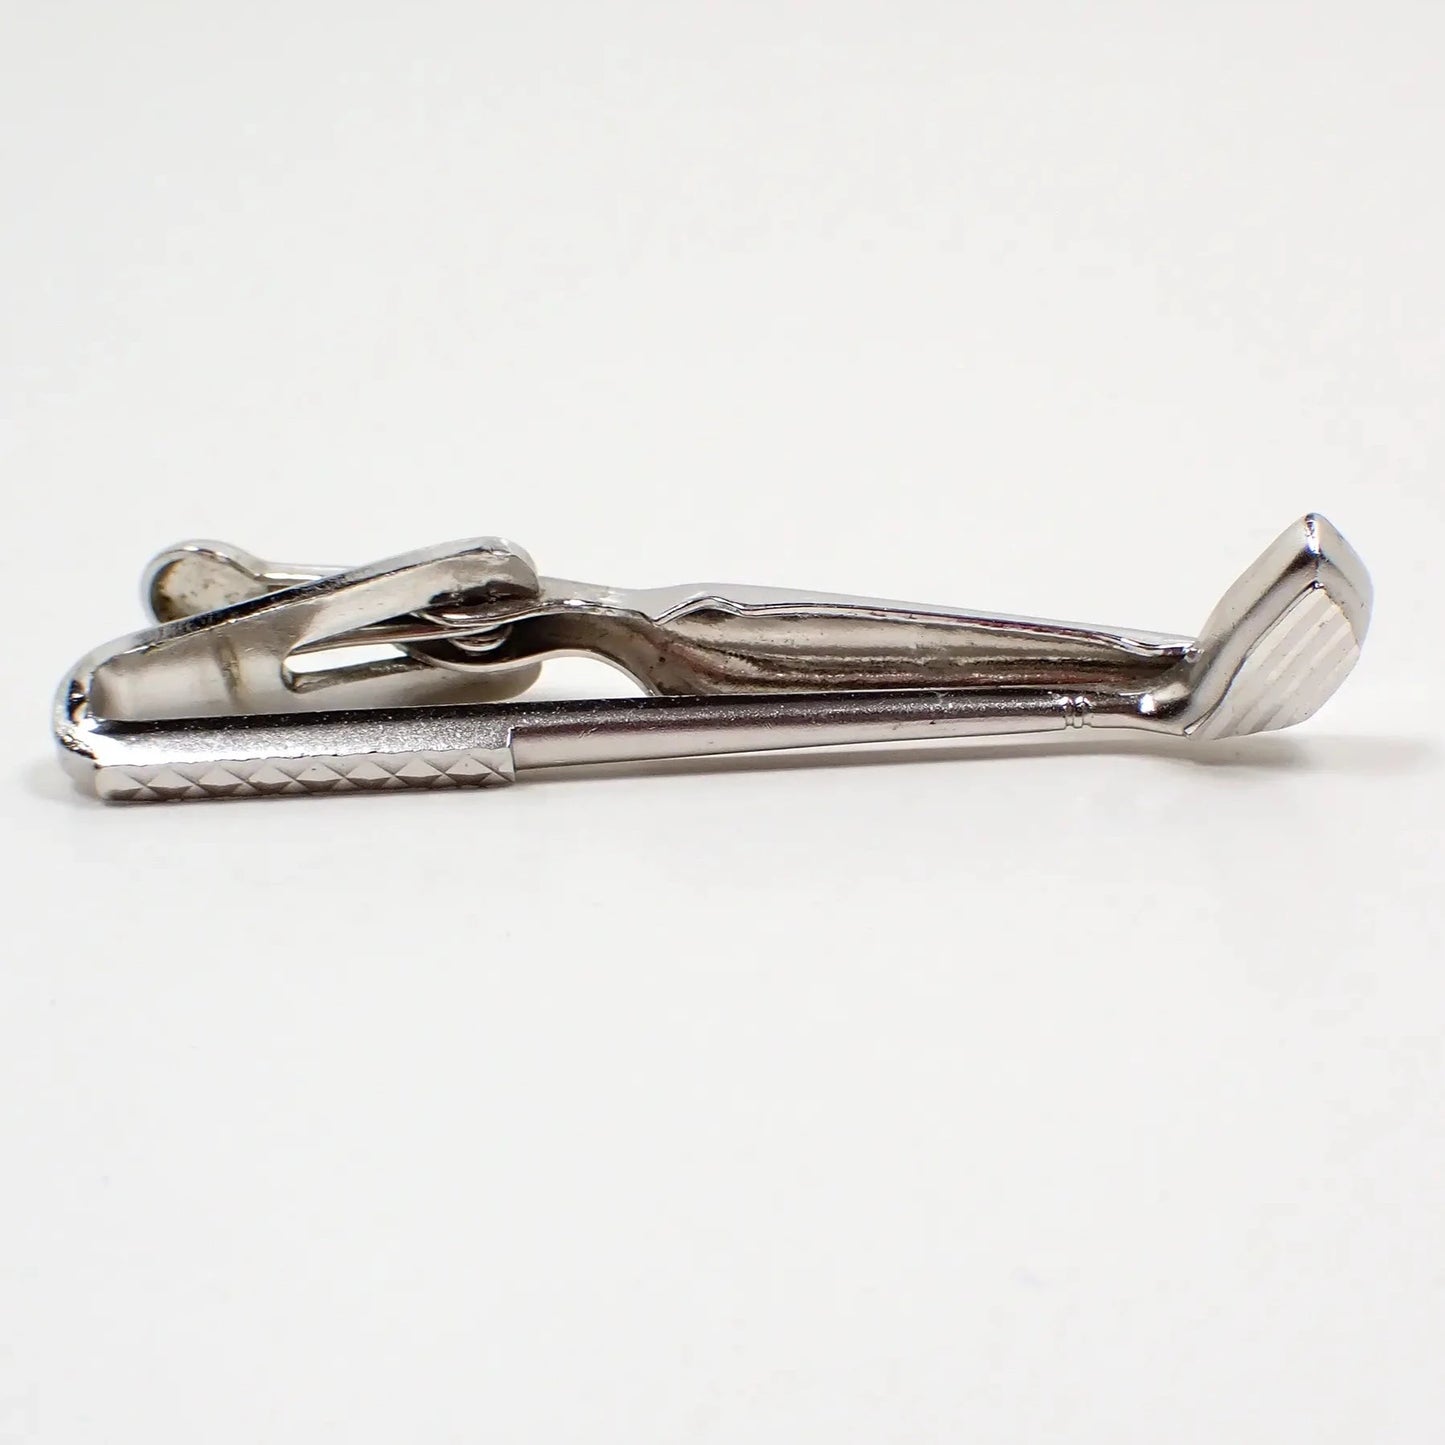 Front view of the retro vintage Swank tie clip. The metal is silver tone in color. It's shaped like a golf club. The handle and bottom part of the club have a cut etched design that gives it some flash as you move around in the light.